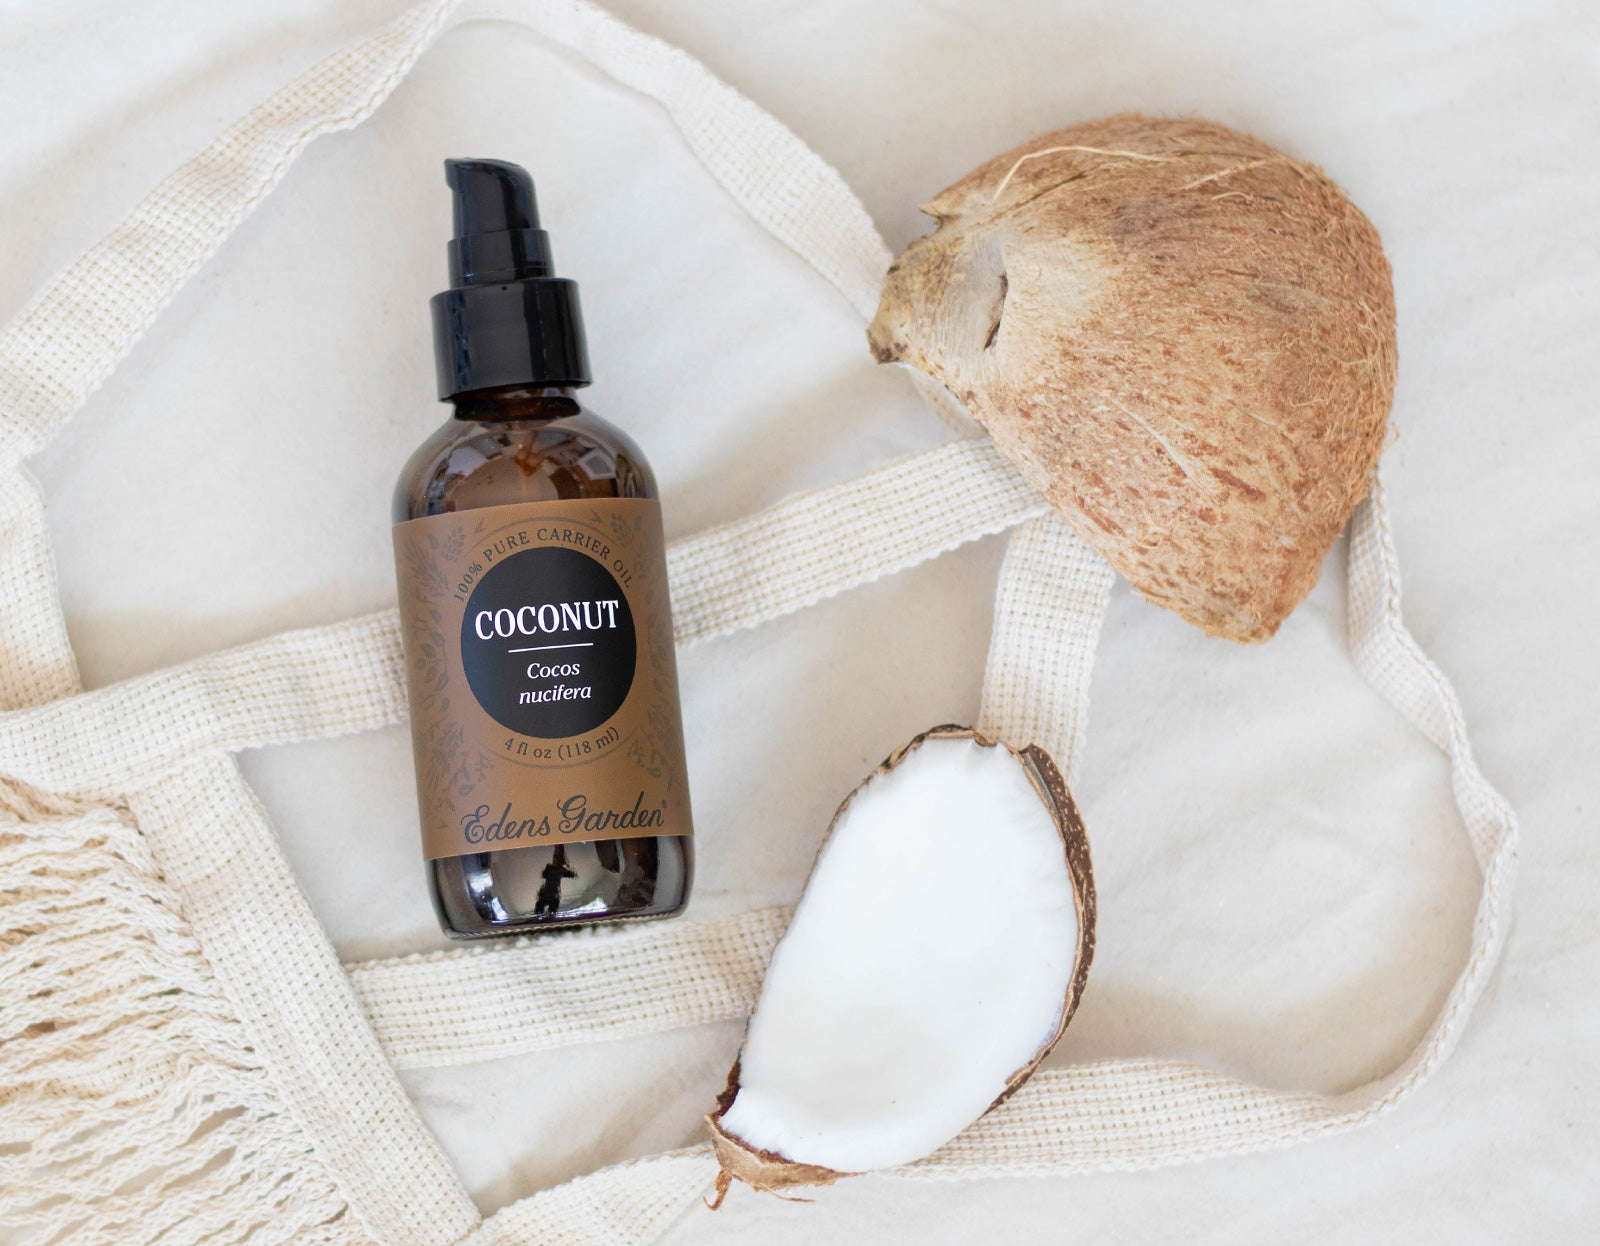 Aromatherapy Carrier Oil Moisturizing Fractionated Coconut Oil